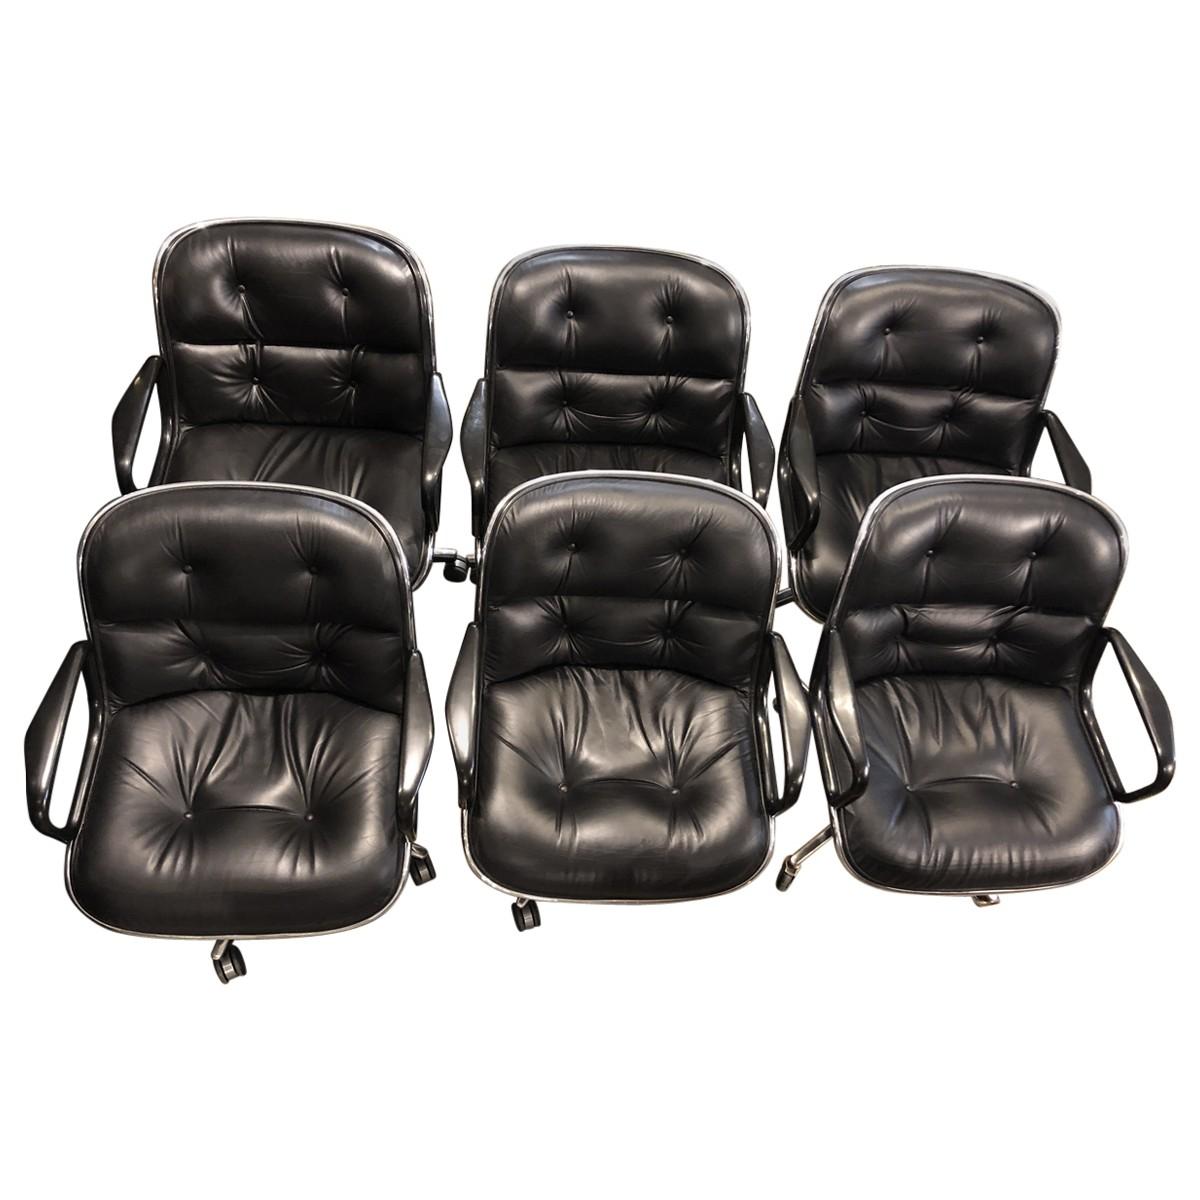 Set of 6 Charles Pollock Executive Chairs